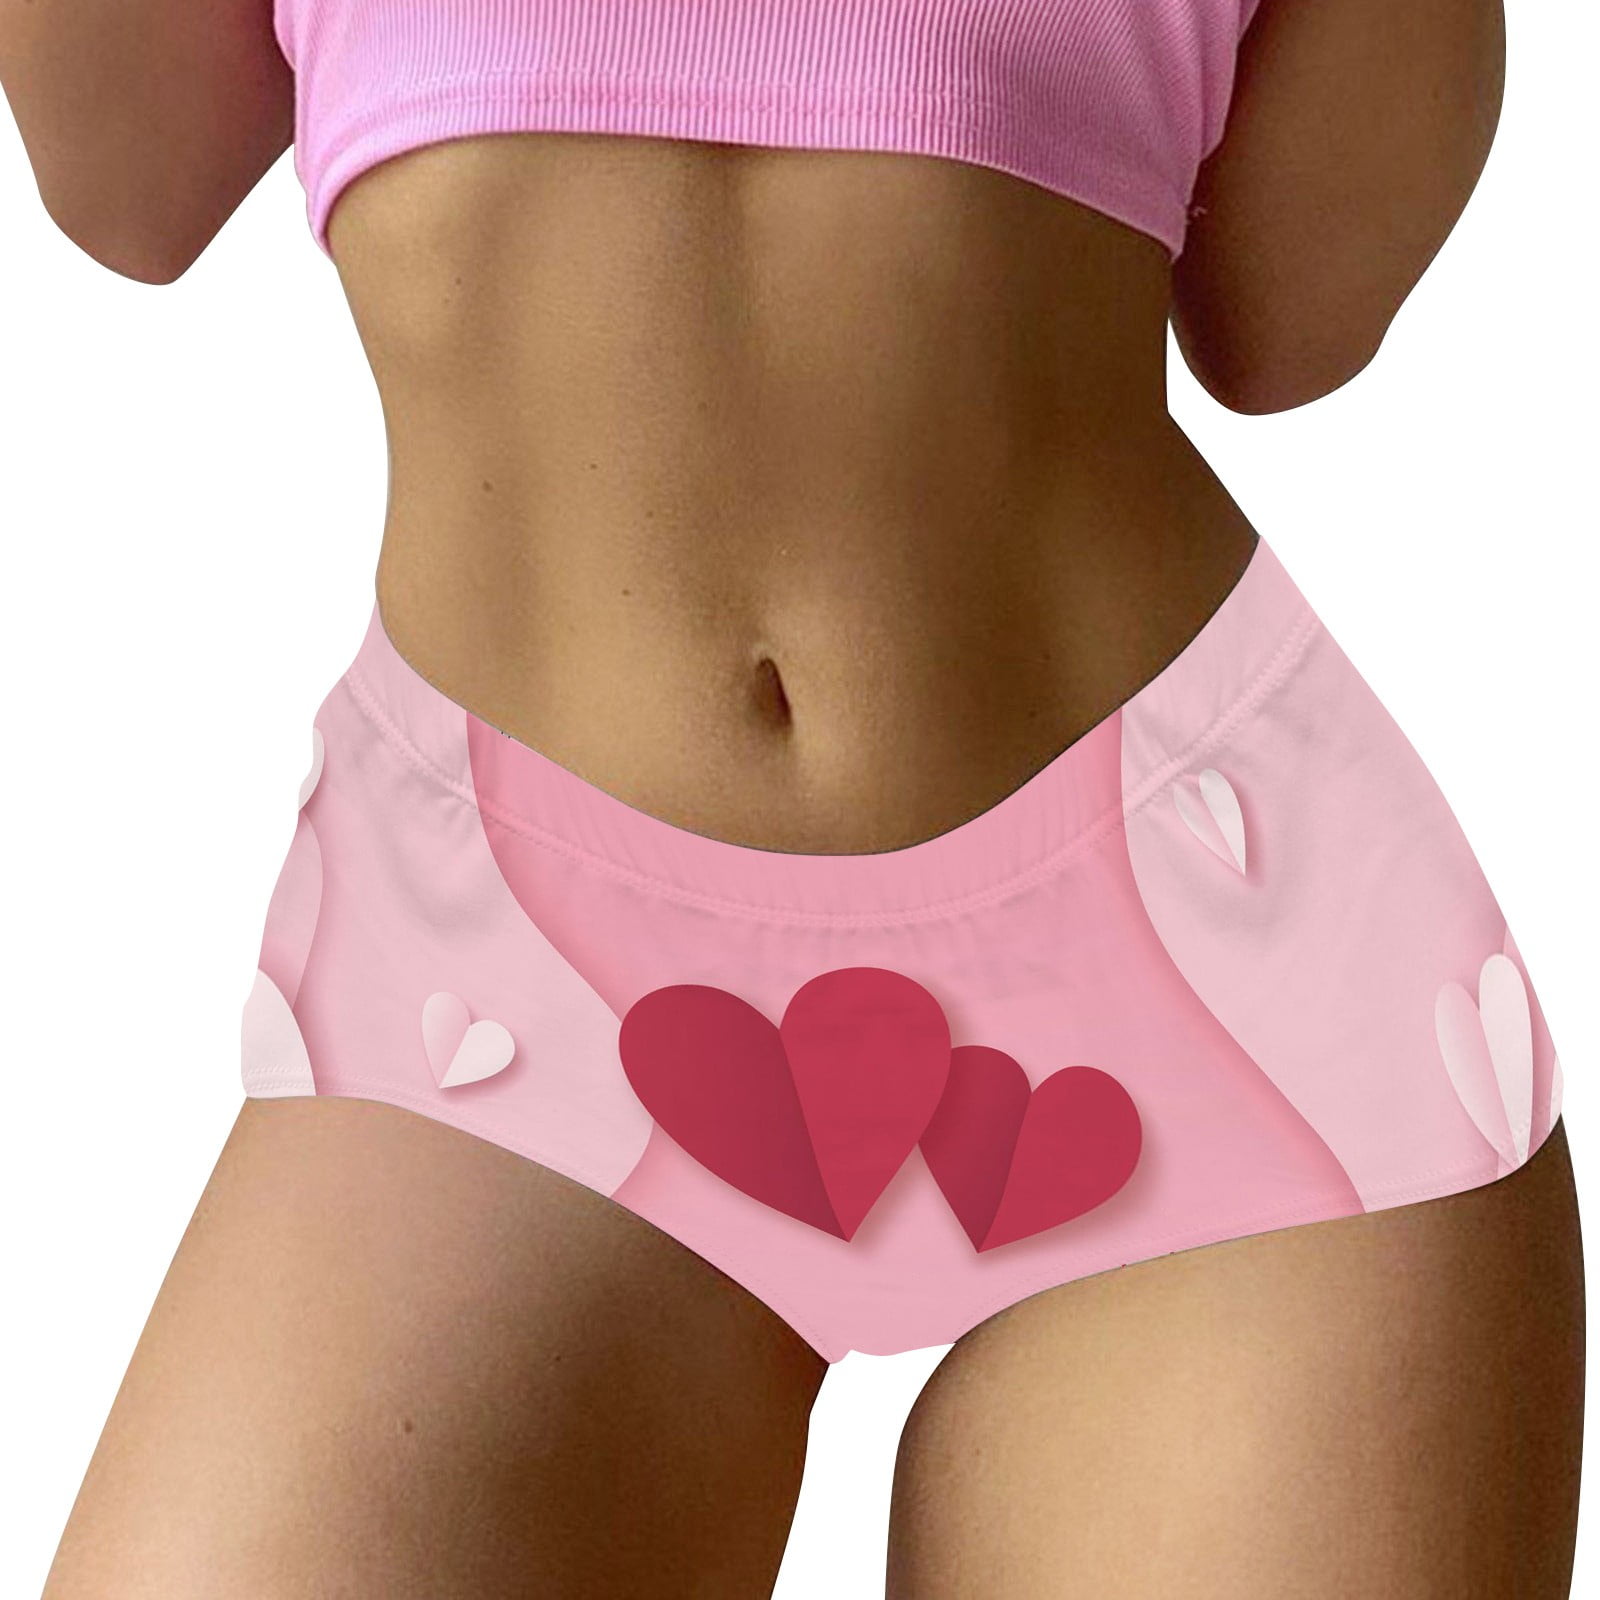 All American Girl - Fireworks and Heart Mens Boxer Brief Underwear by - NDS  WEAR